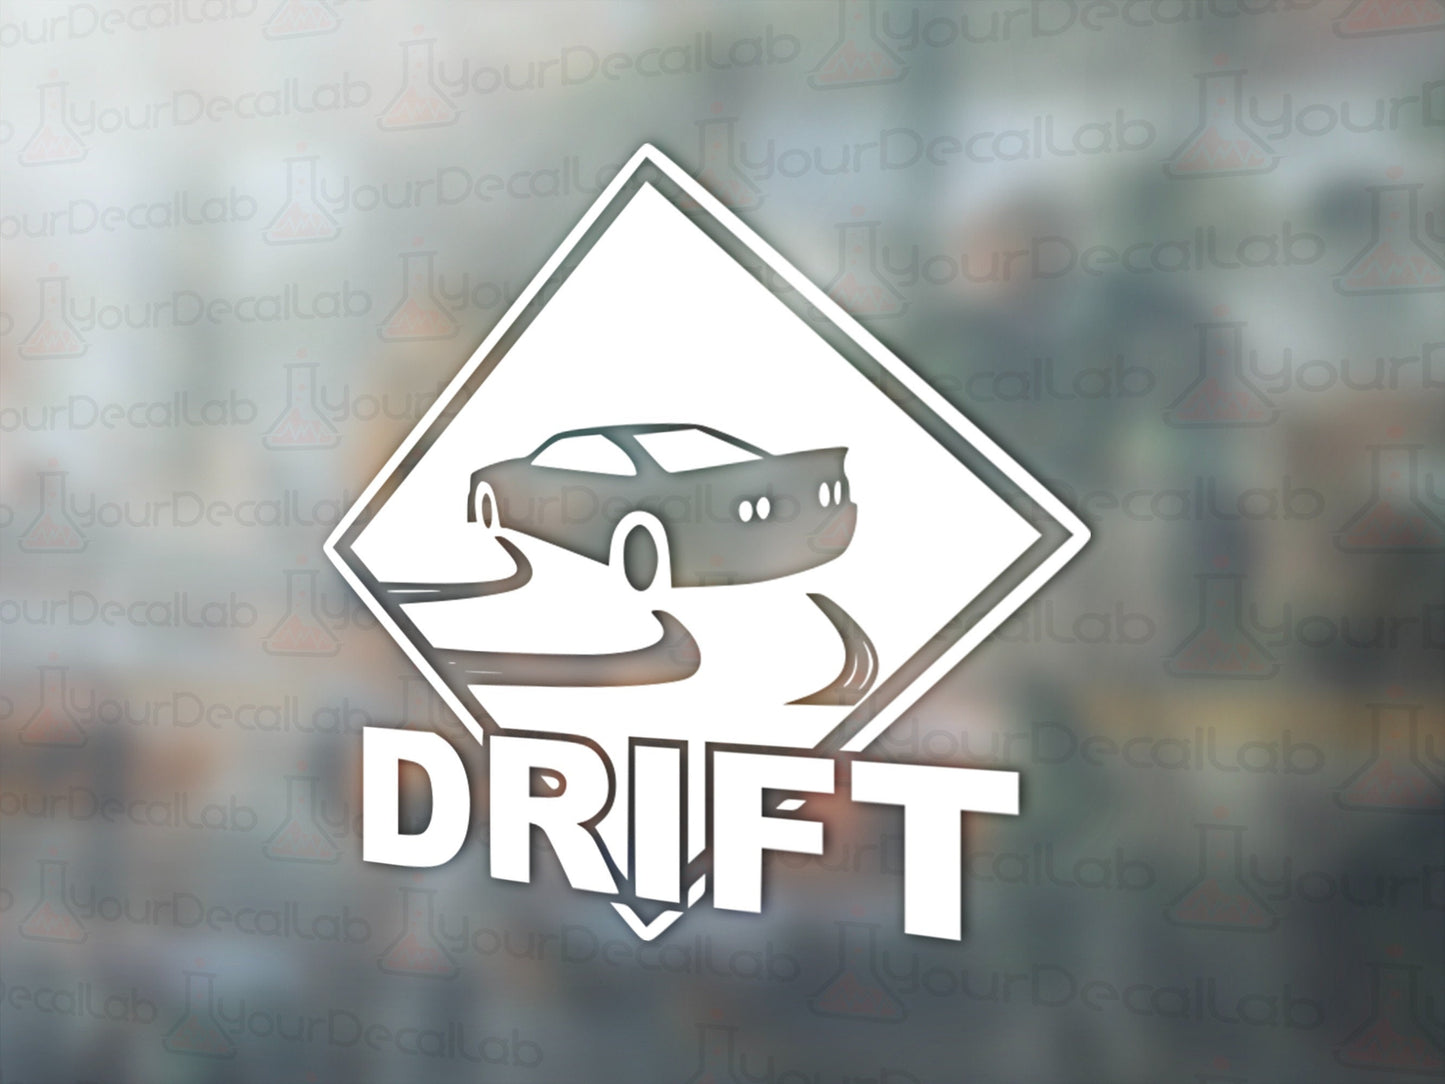 Drift Sign Decal - Many Colors & Sizes